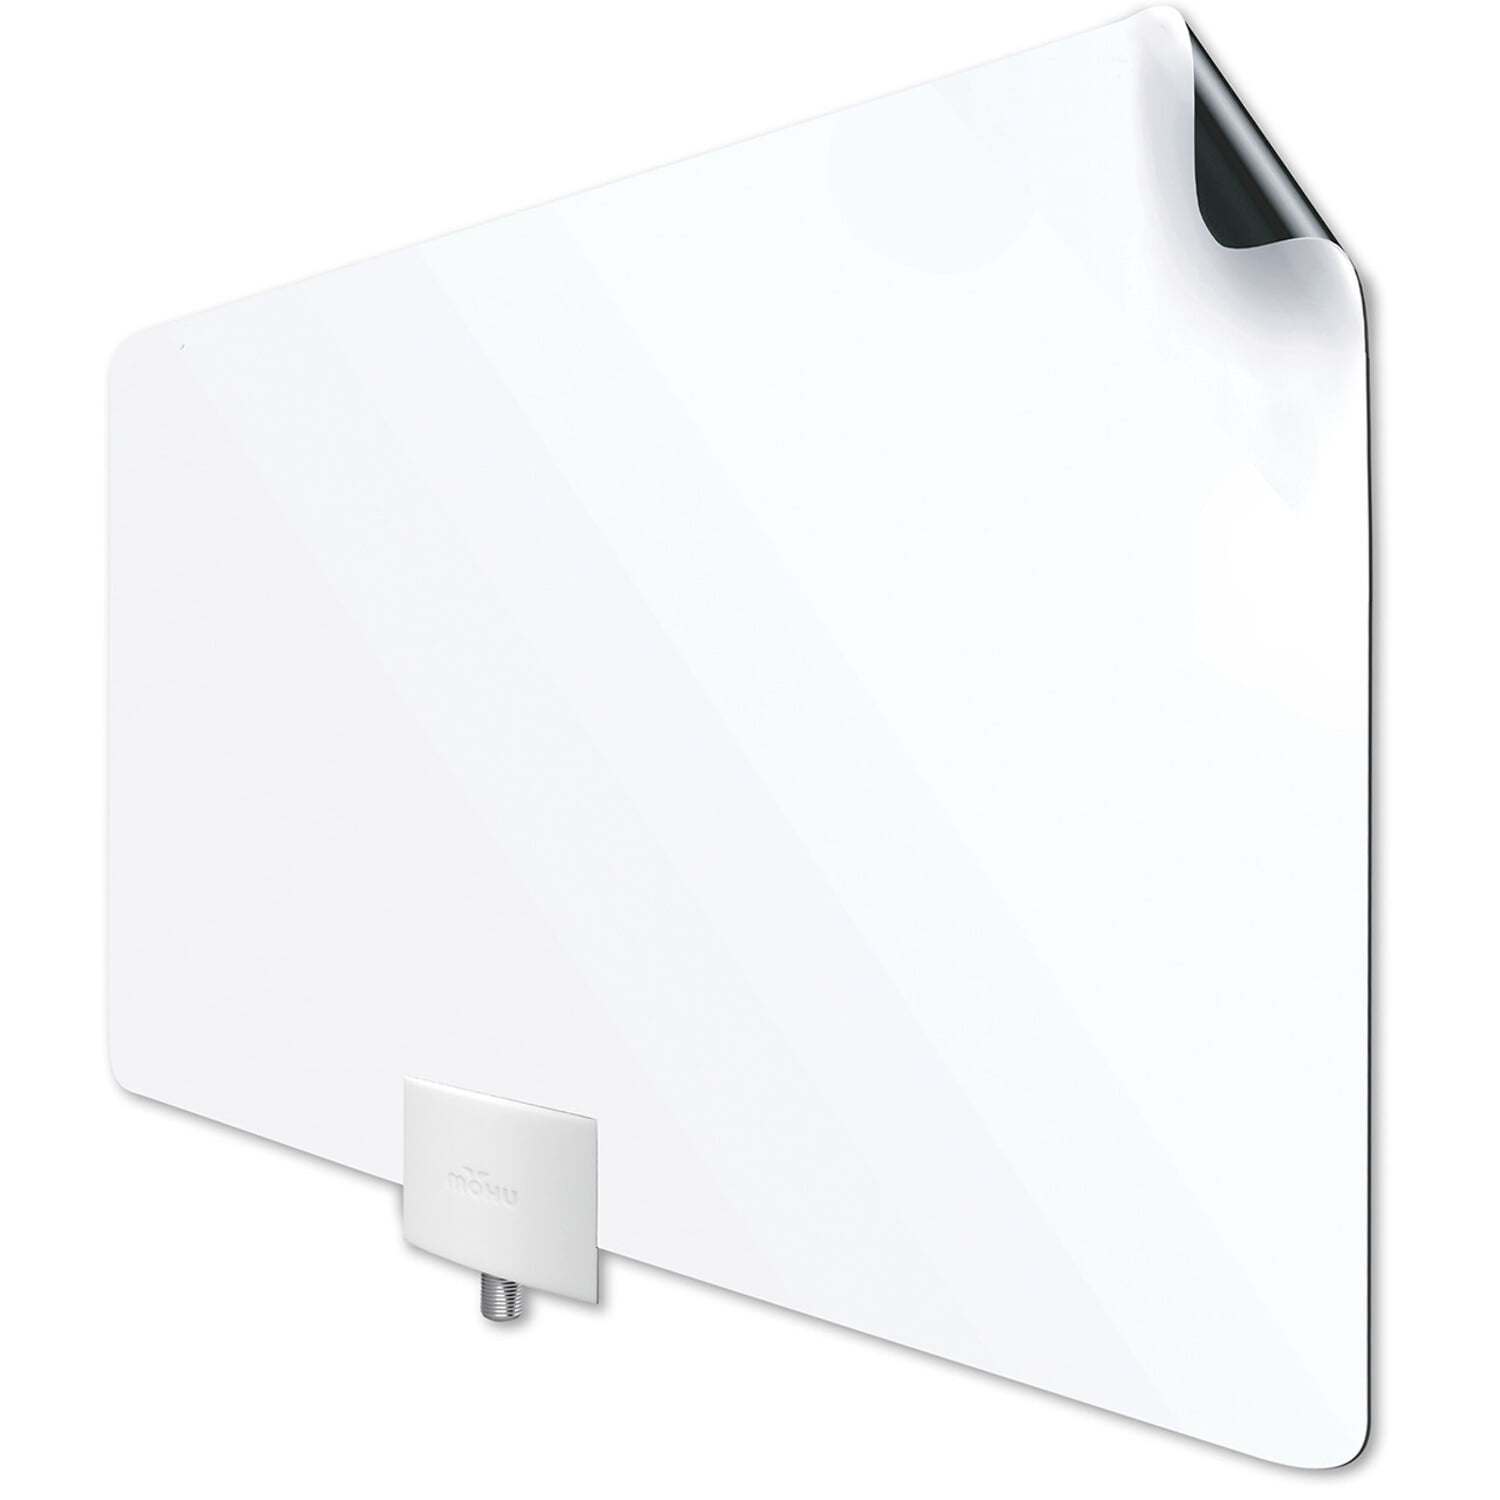 Mohu Leaf 50 Amplified Indoor HDTV Antenna w/ Jolt Switch In-Line Amplifier and 12 Ft. Coaxial Cable - image 4 of 11